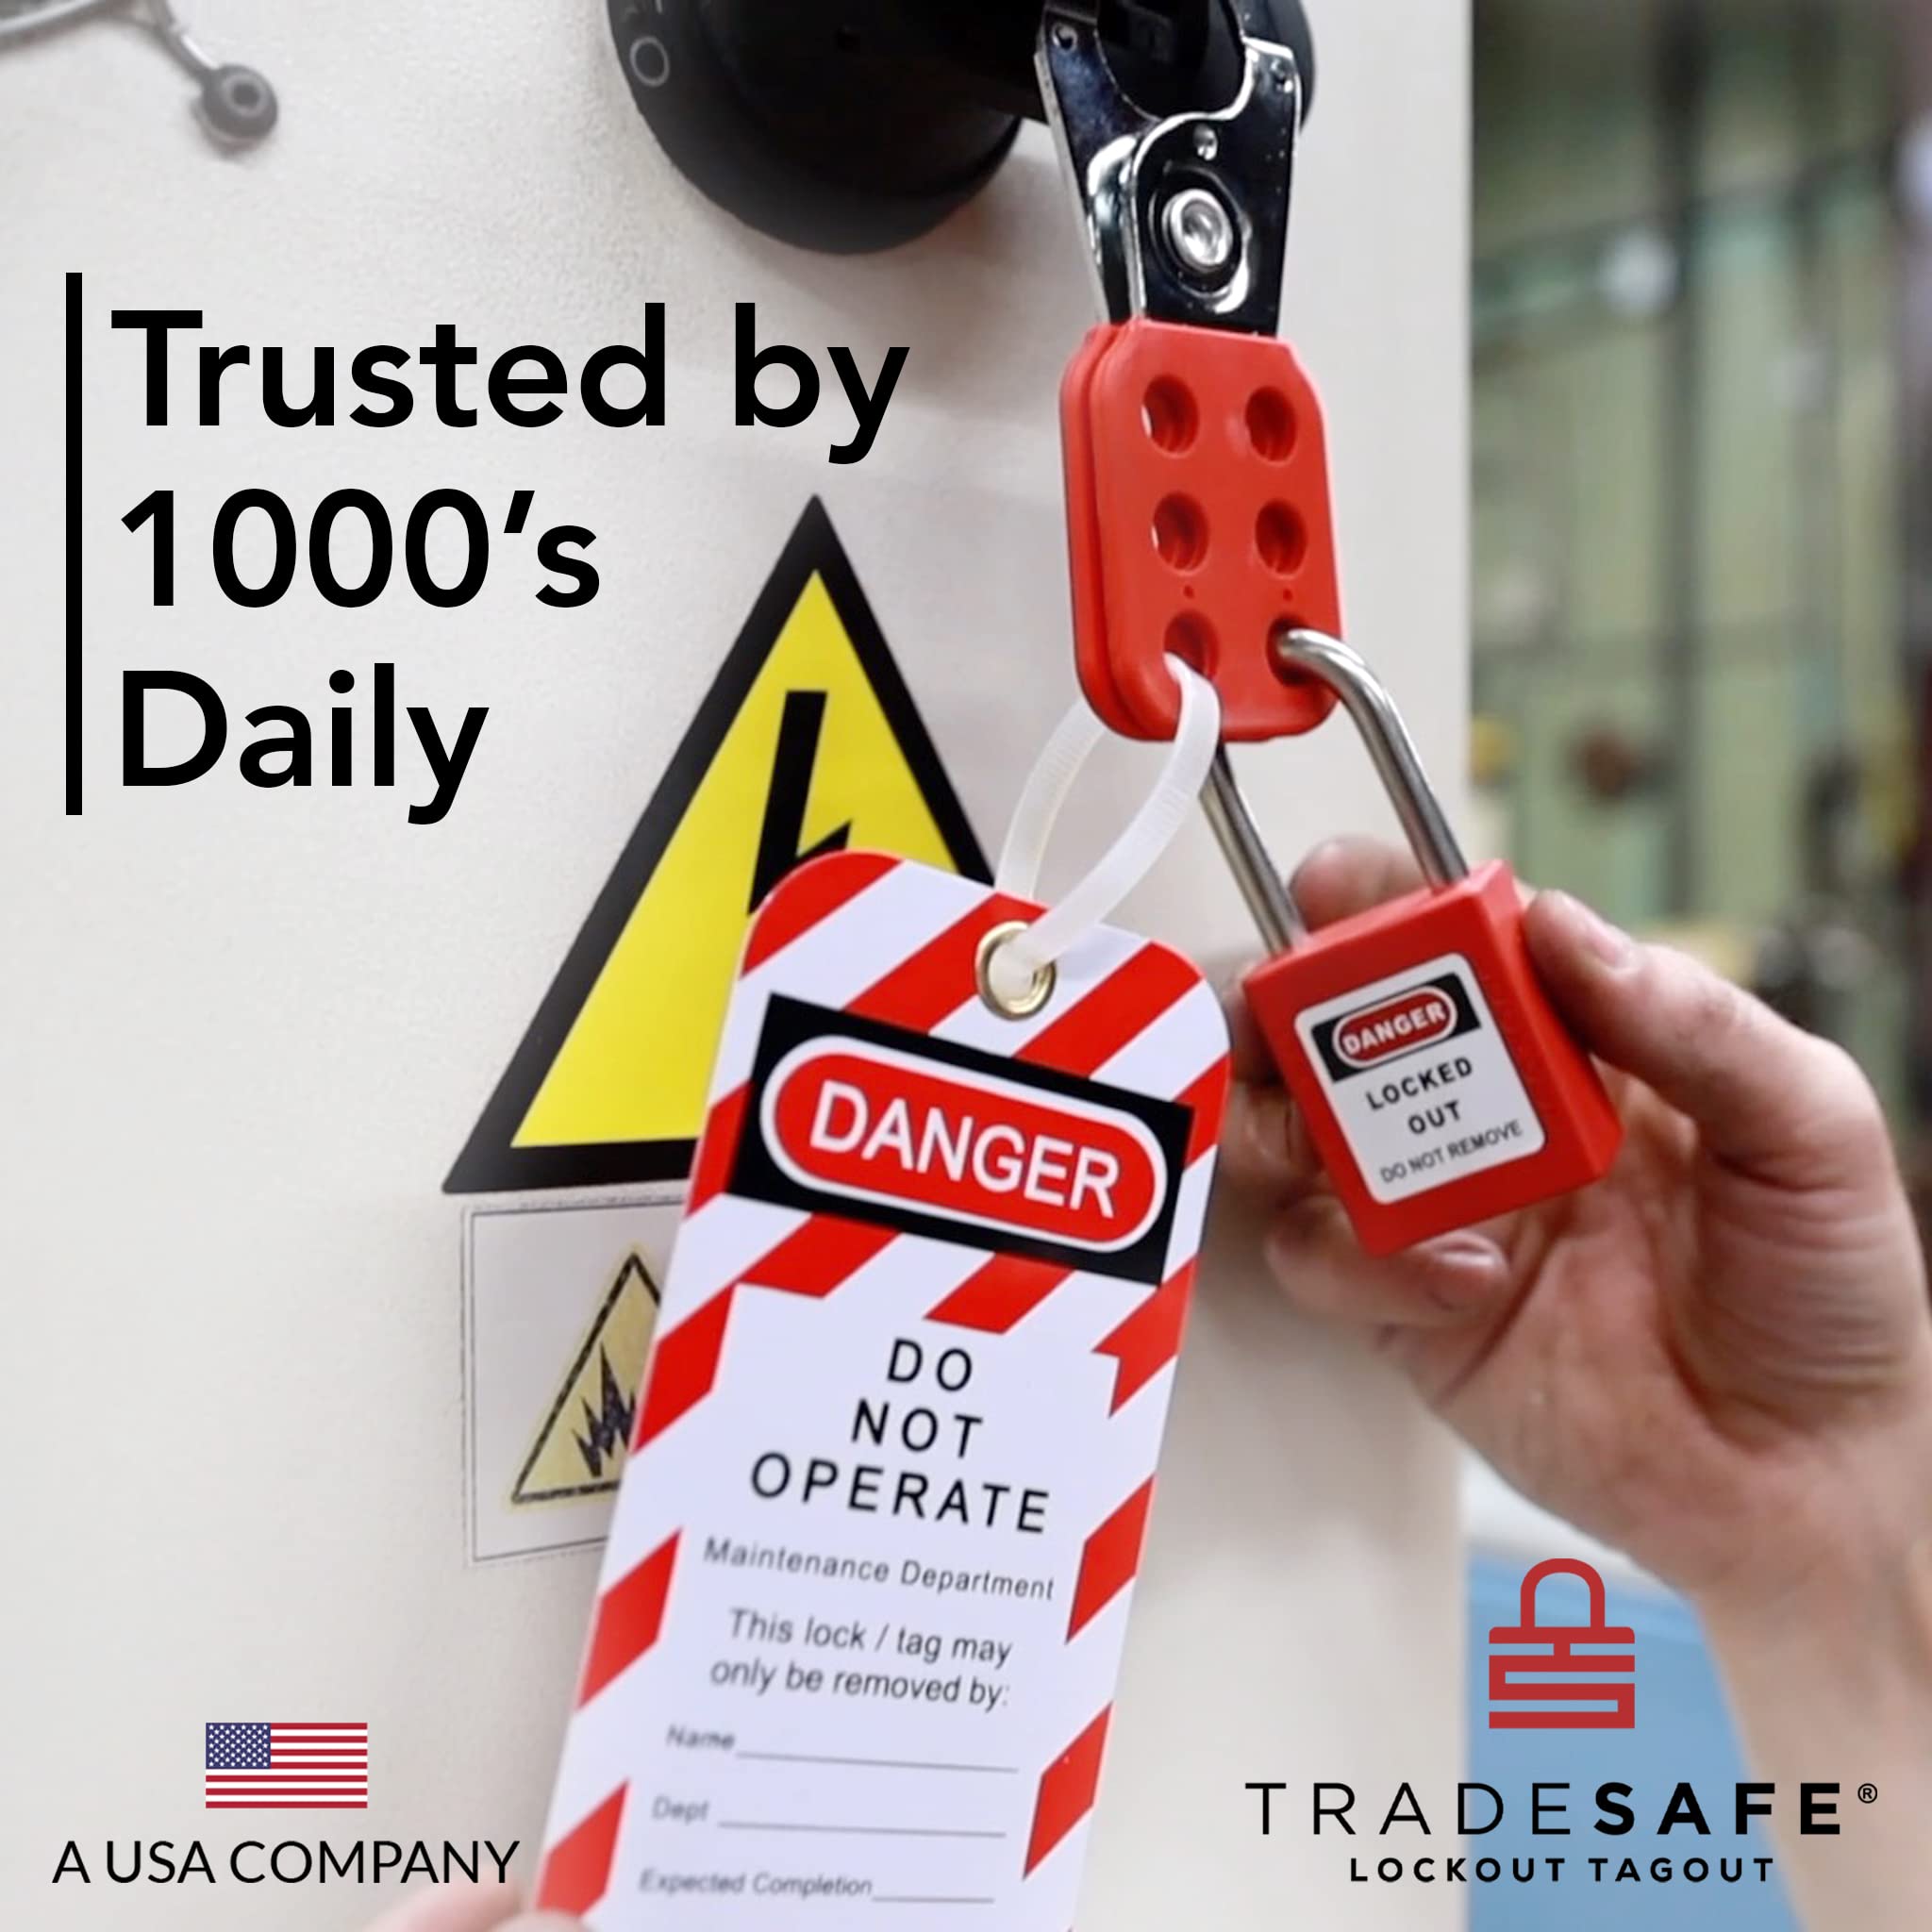 TRADESAFE Lockout Tagout Station with Loto Devices - Lock Out Tag Out Kit Board Includes 8 Pack Safety Lock Set, 3 Hasps for Padlocks, 30 Do Not Operate Tags for Lockout Safety, OSHA Compliance